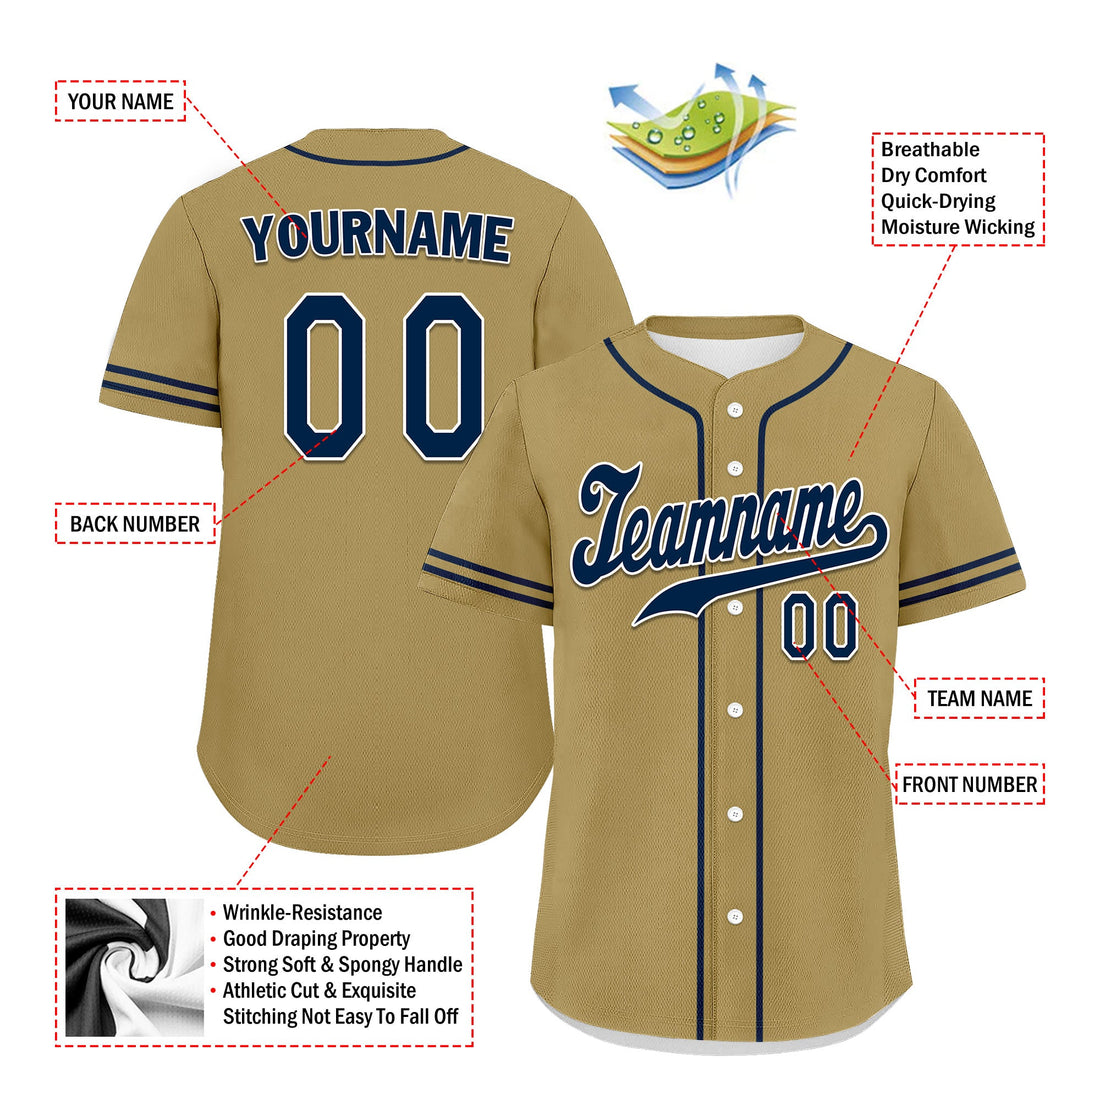 Custom Gold Classic Style Blue Personalized Authentic Baseball Jersey UN002-bd0b00d8-af